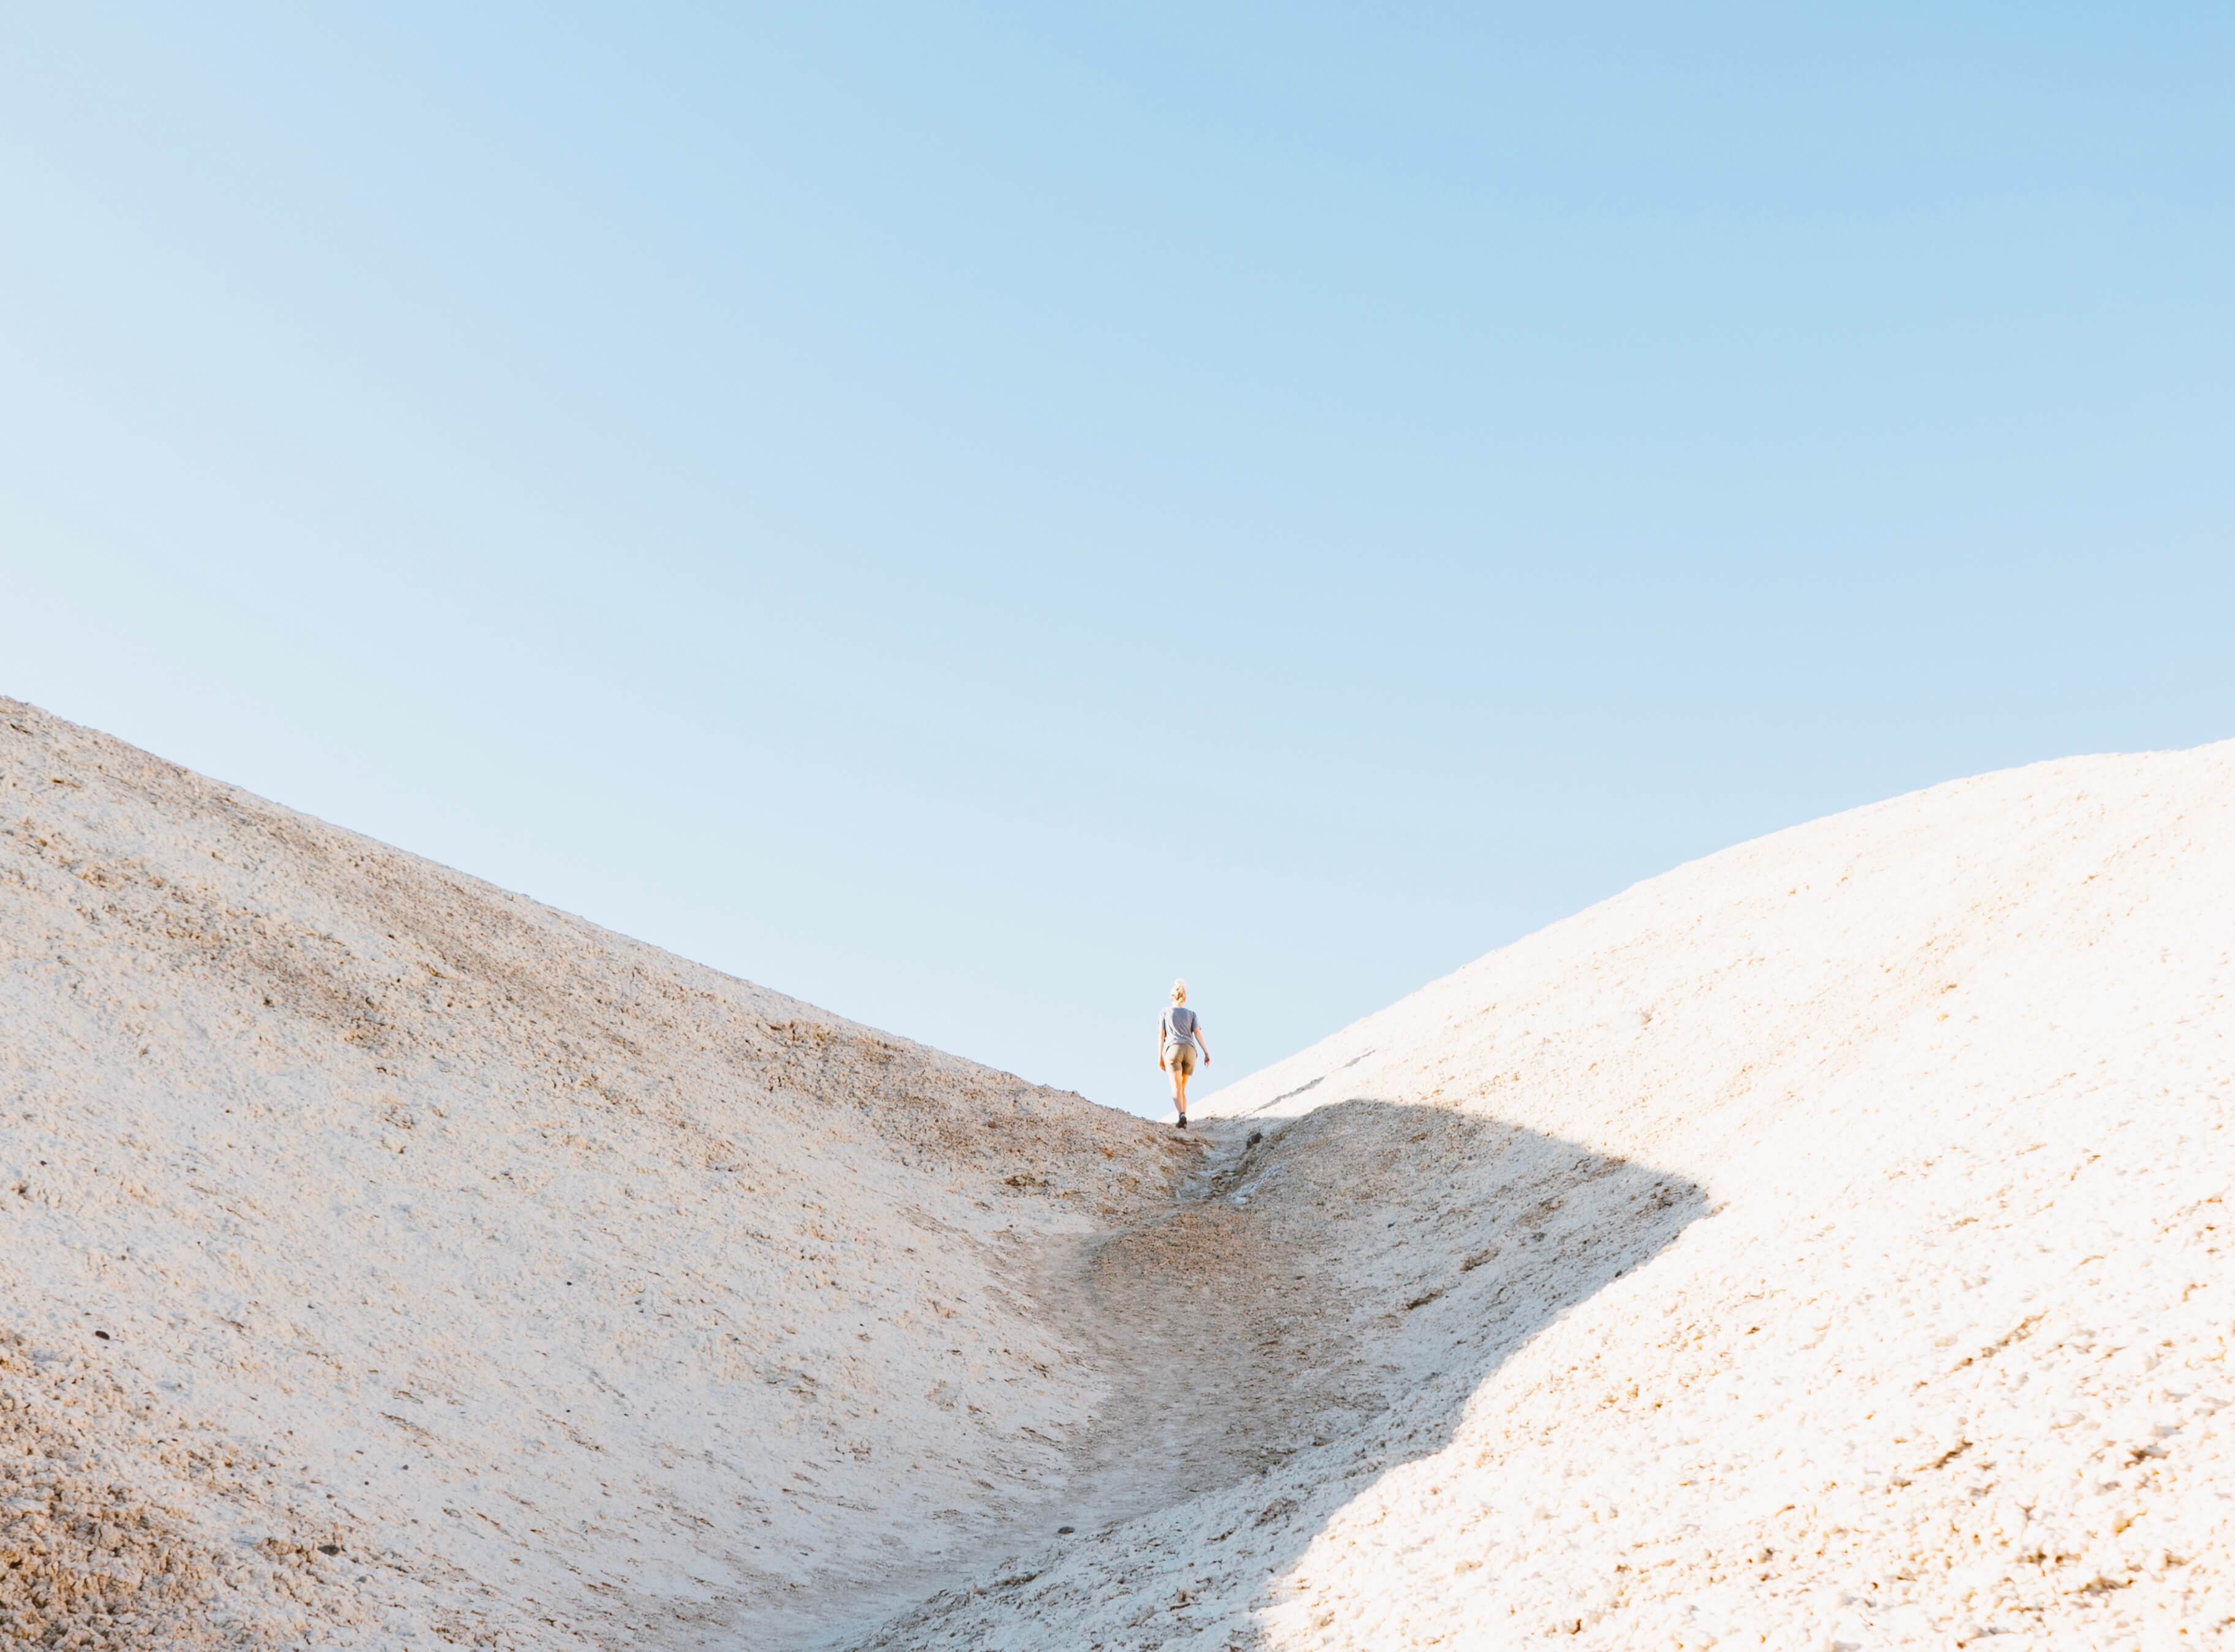 Someone climbing a hill in an arid landscape